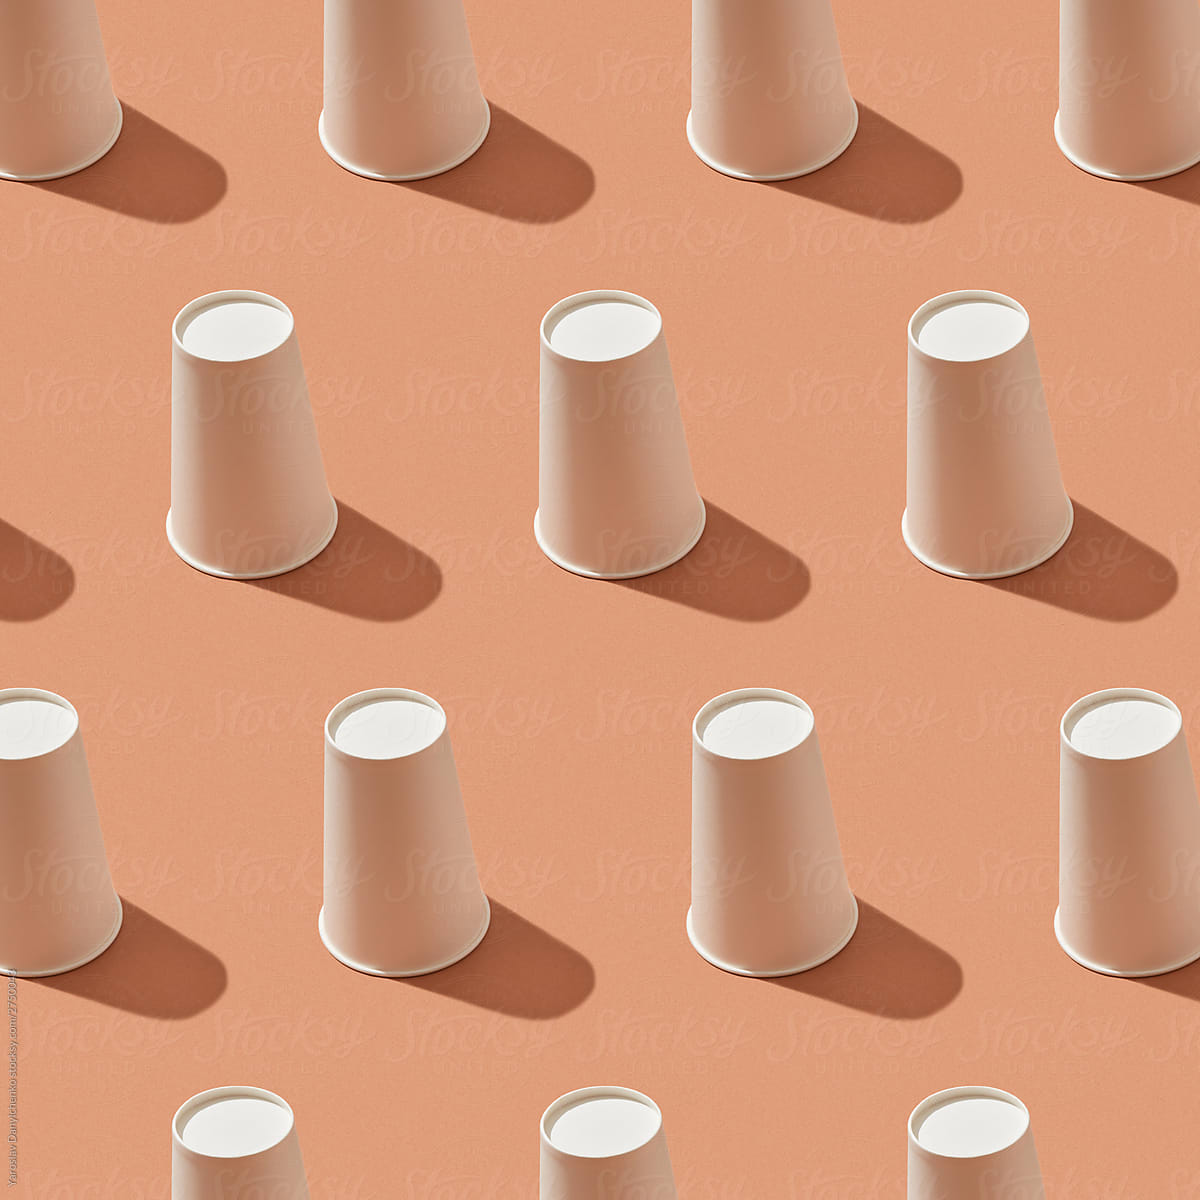 Inverted paper cups pattern.